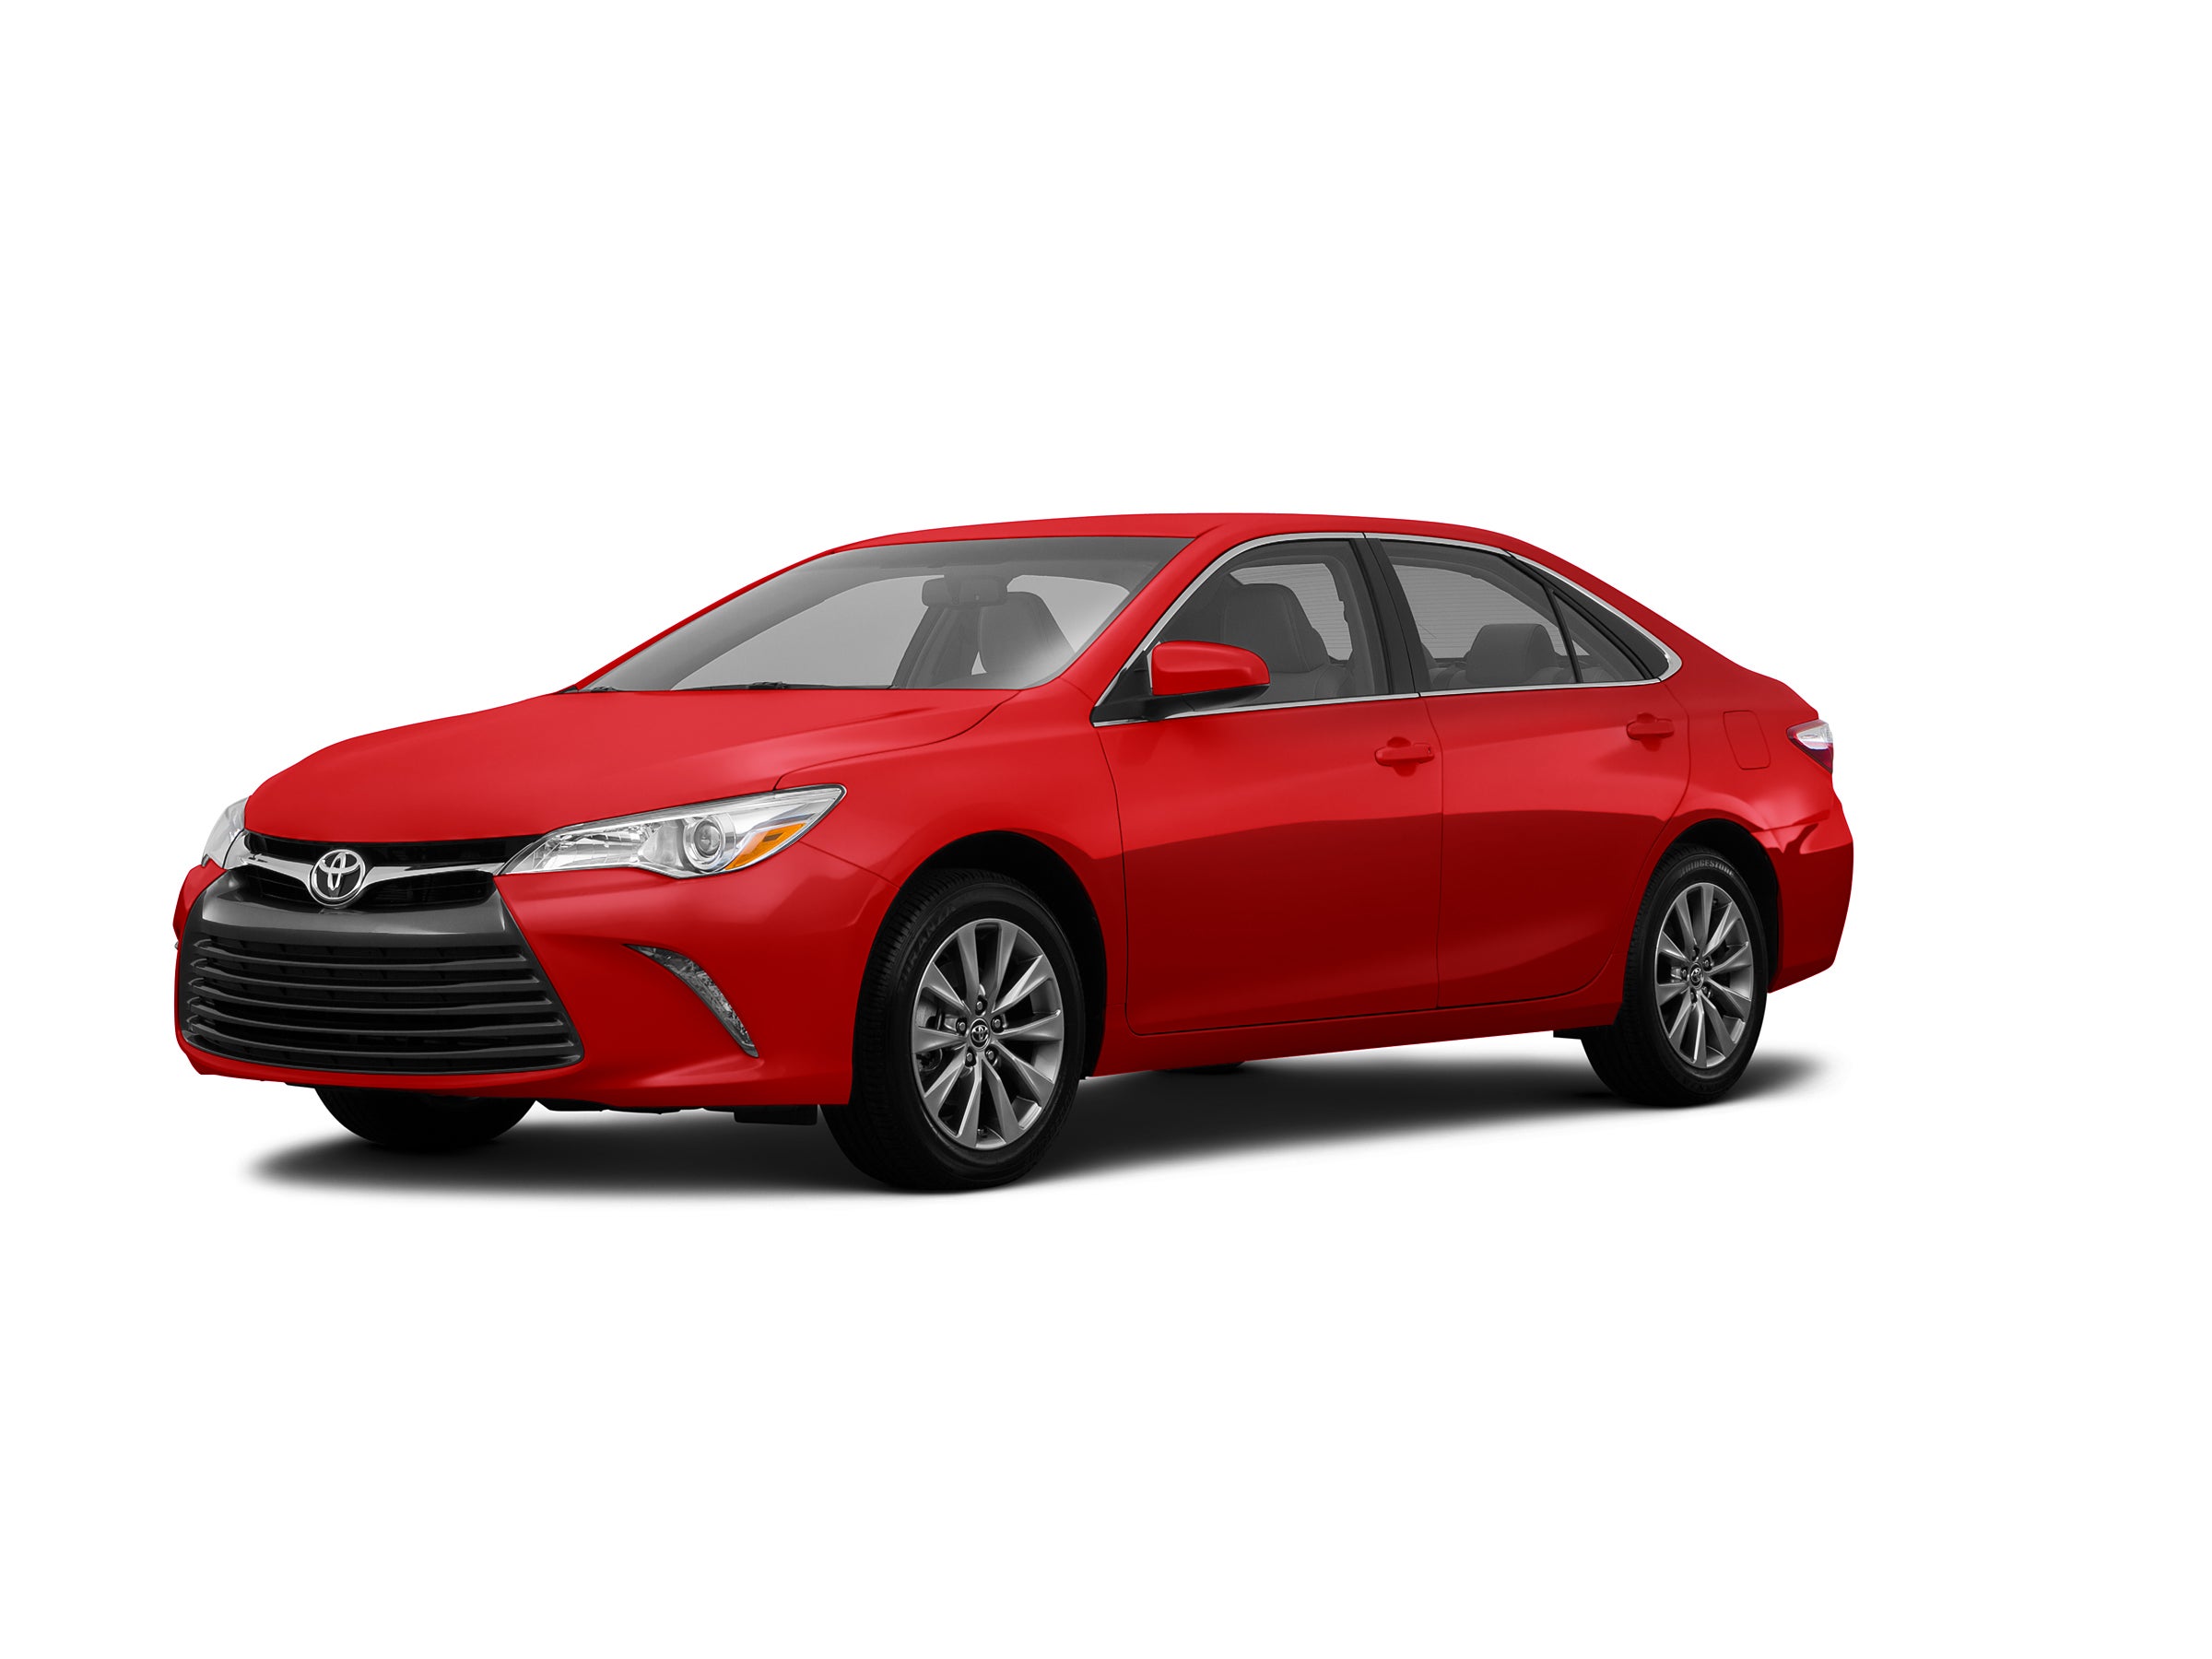 2016 Toyota Camry XLE Was Considered A Large Sedan.